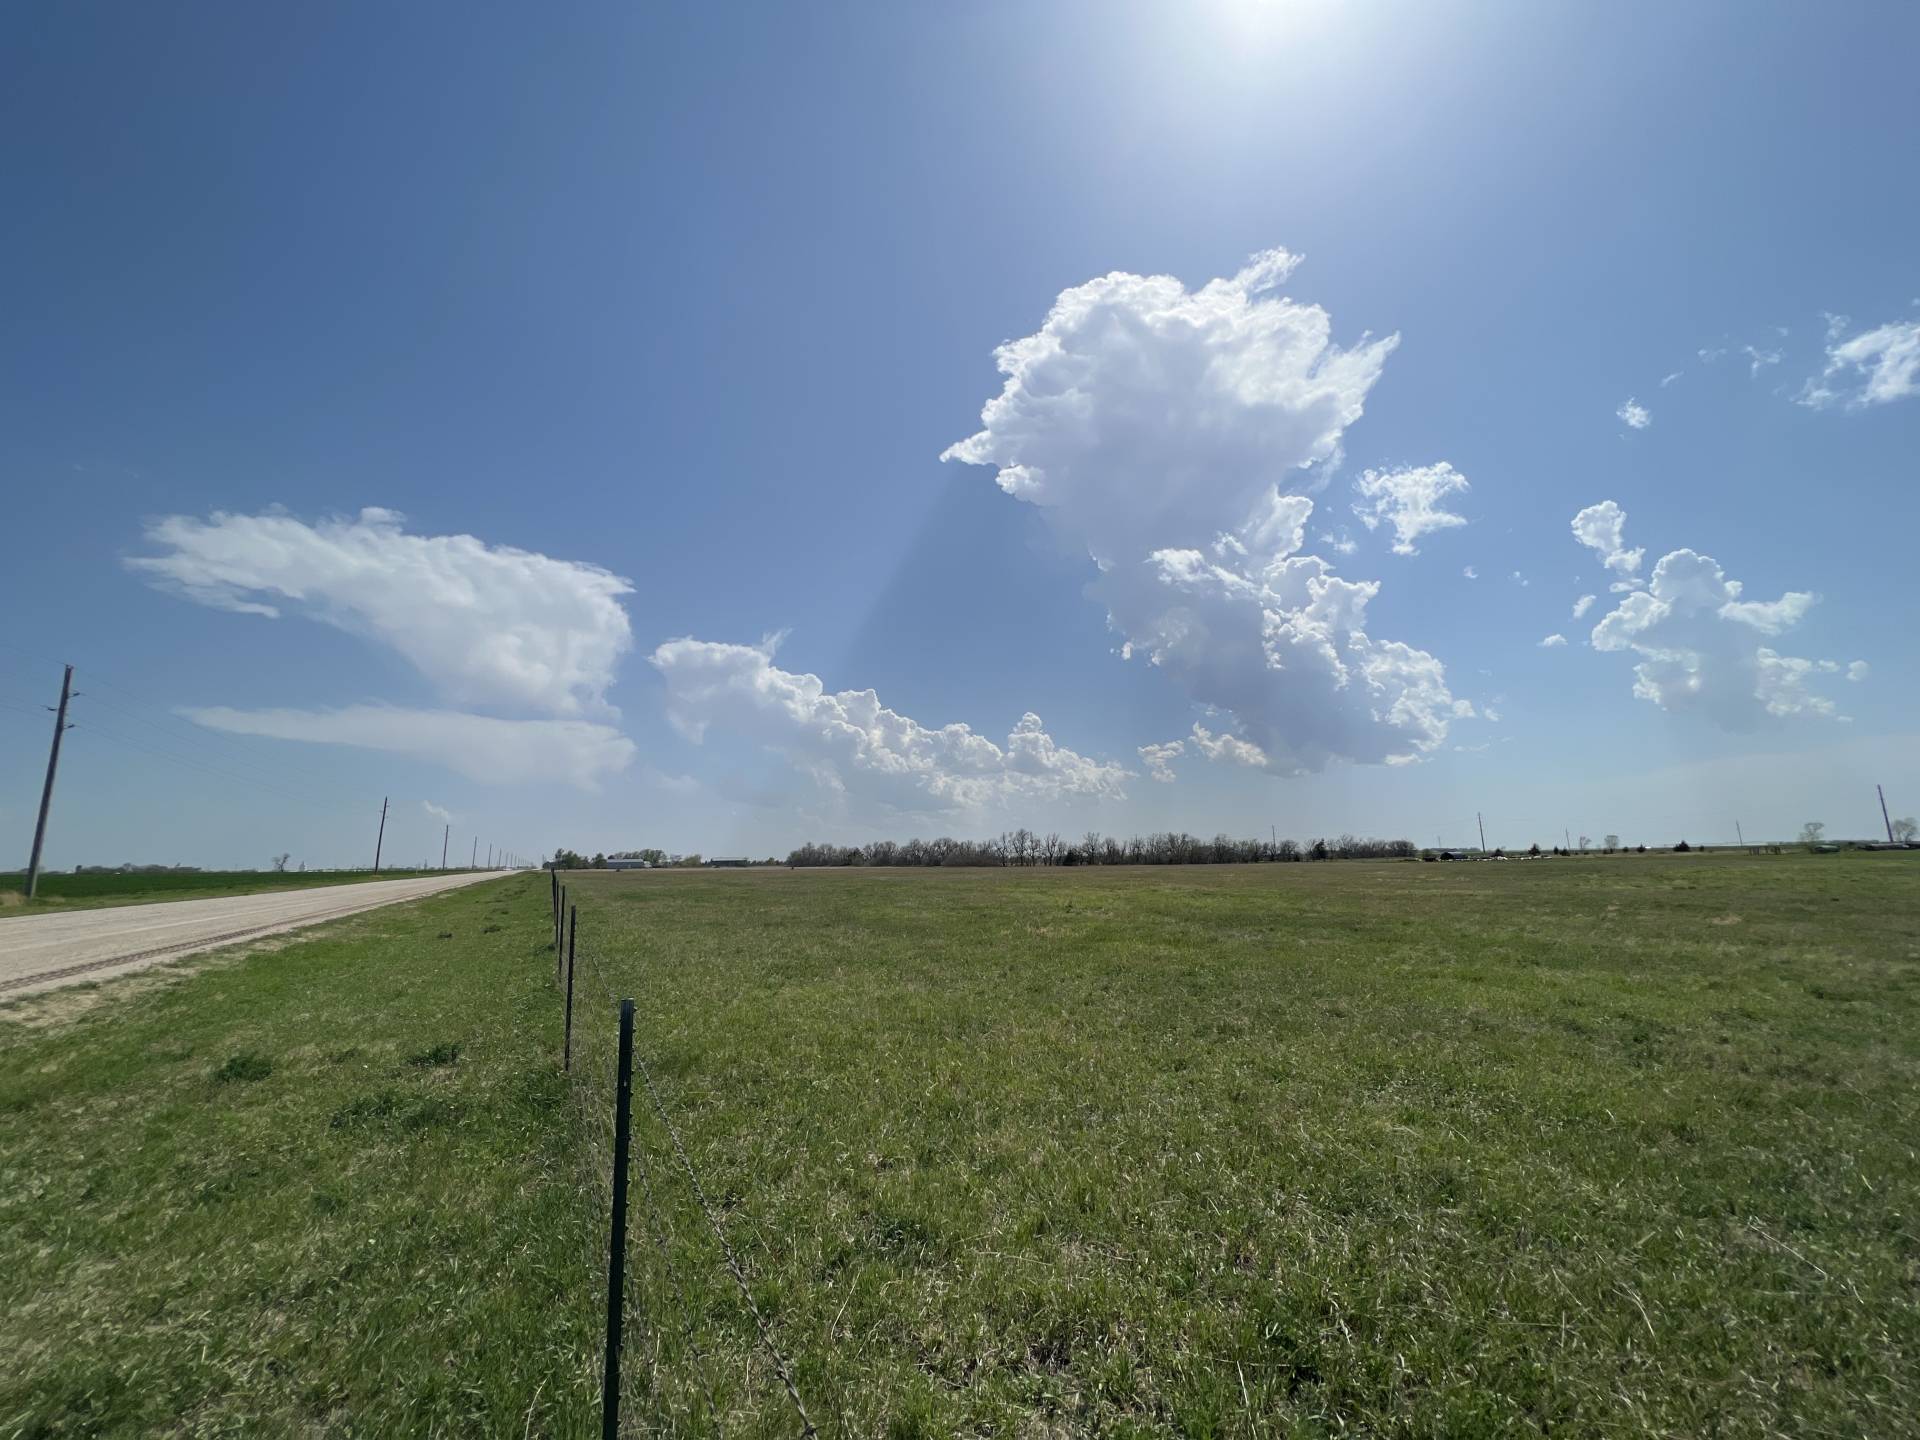 Sitting on the dryline on the west side of McPherson, KS  at 03:35 PM, seeing if these towers can make a go of it!